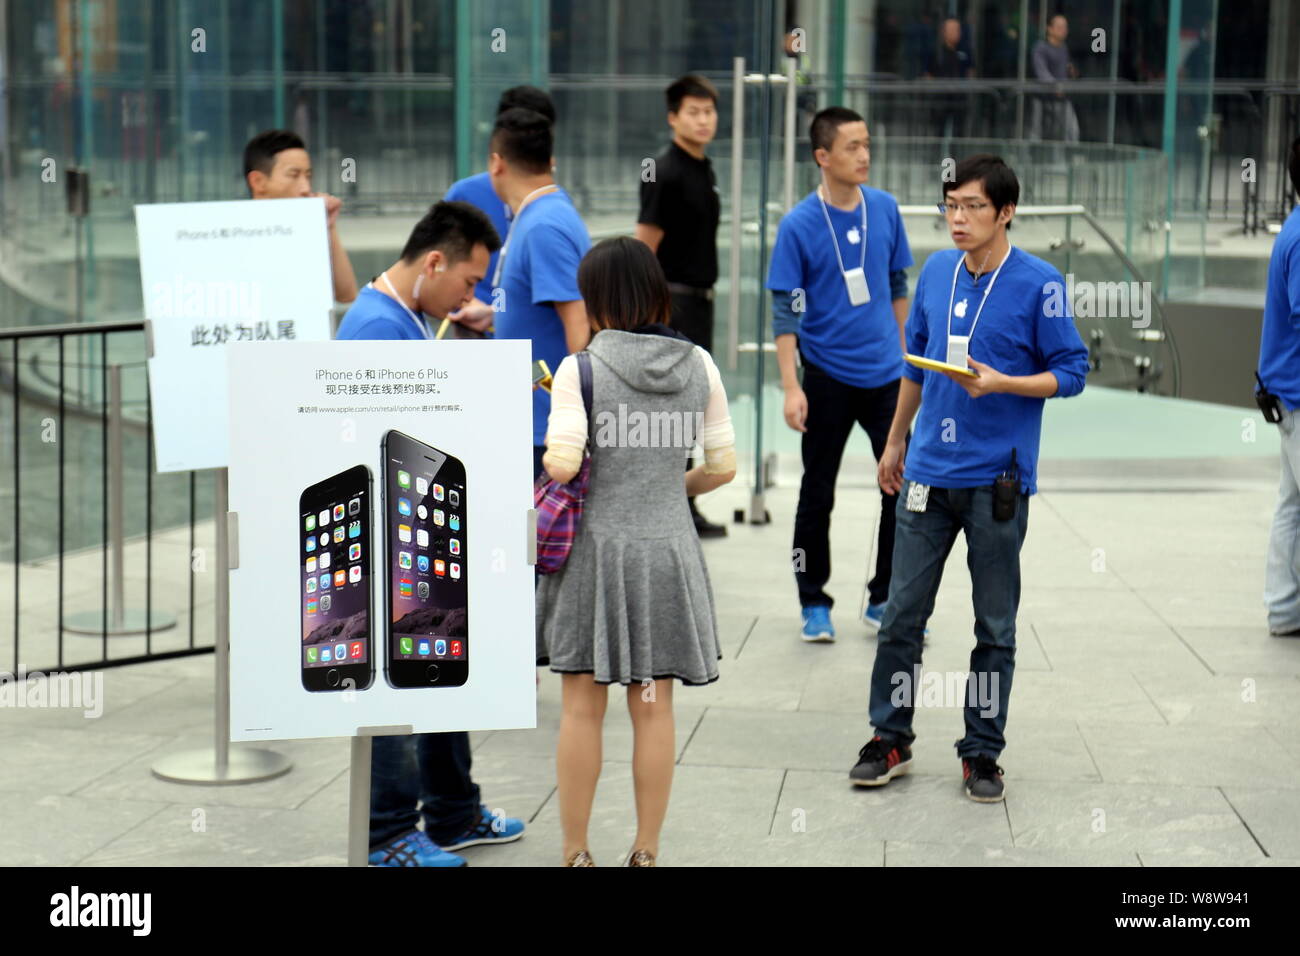 Employees stand next to an advertisement for iPhone 6 and iPhone 6 Plus smartphones outside the Apple Store in the Lujiazui Financial District in Pudo Stock Photo